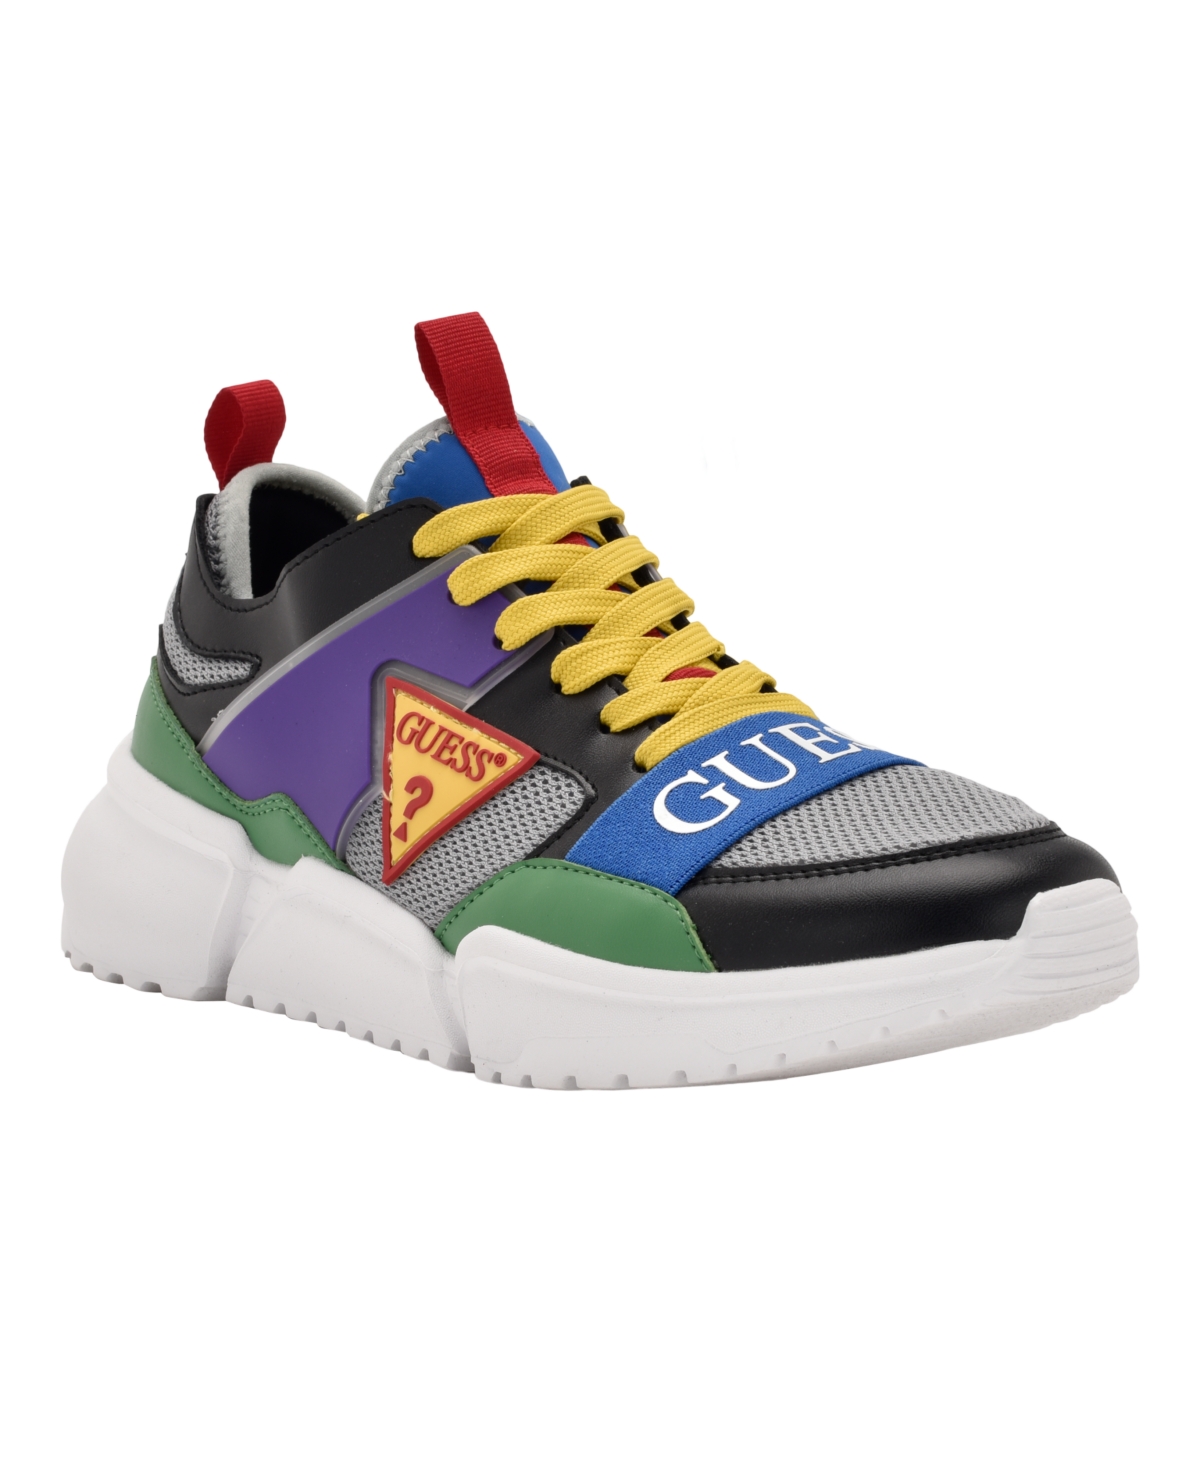 Guess Men's Skillz Lace Up Fashion High Top Sneakers In Multi Color